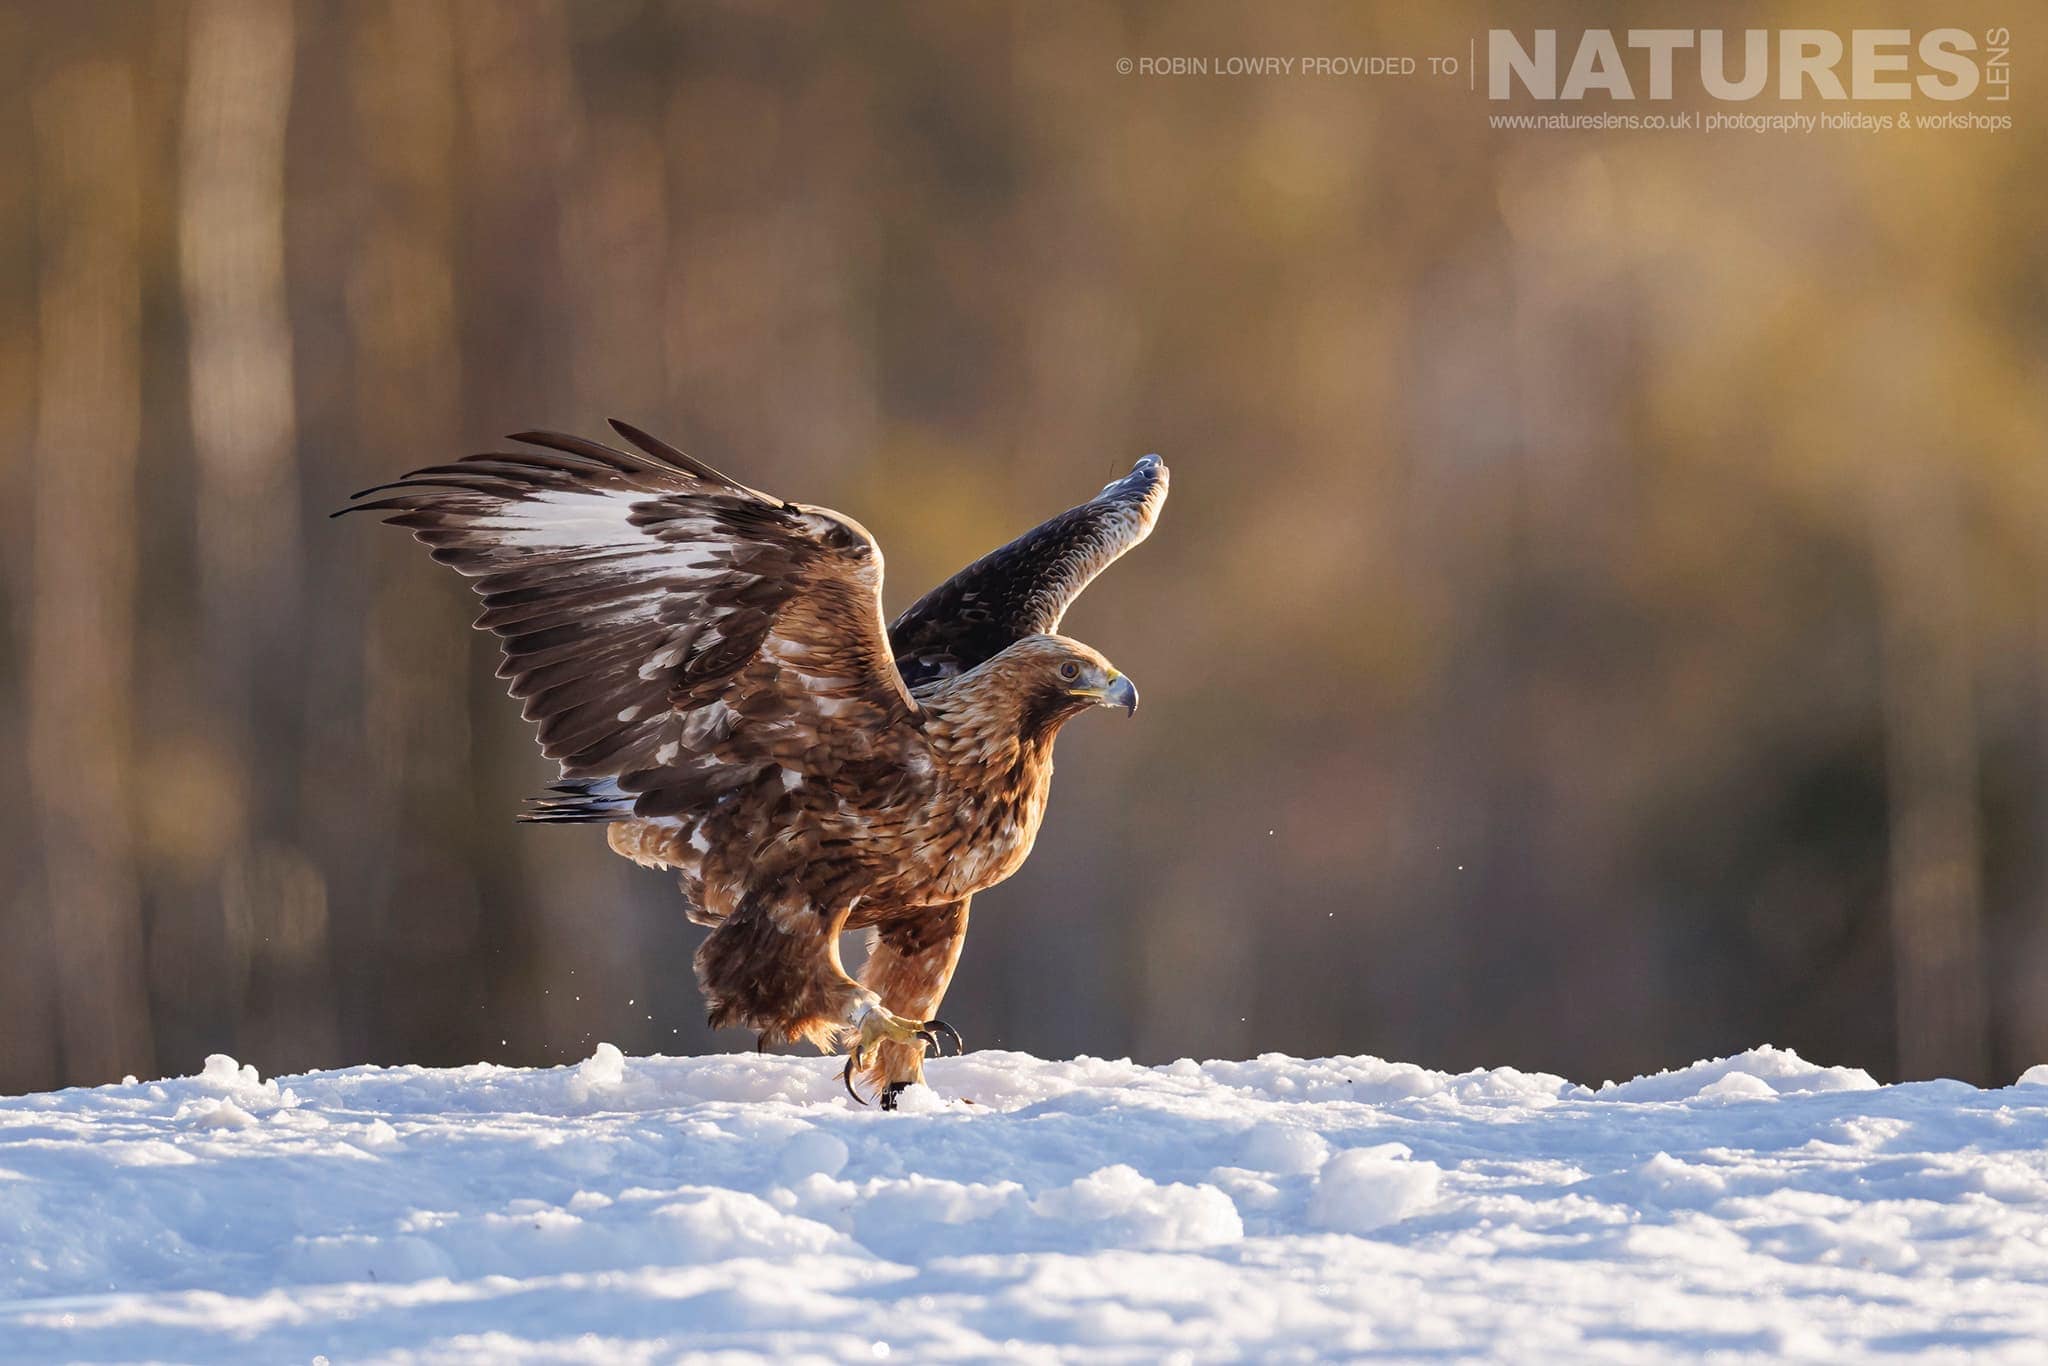 One Of The Resident Golden Eagles Walking On The Snow Photographed During A Natureslens Photography Holiday To Photograph Northern Sweden'S Eagles In Winter